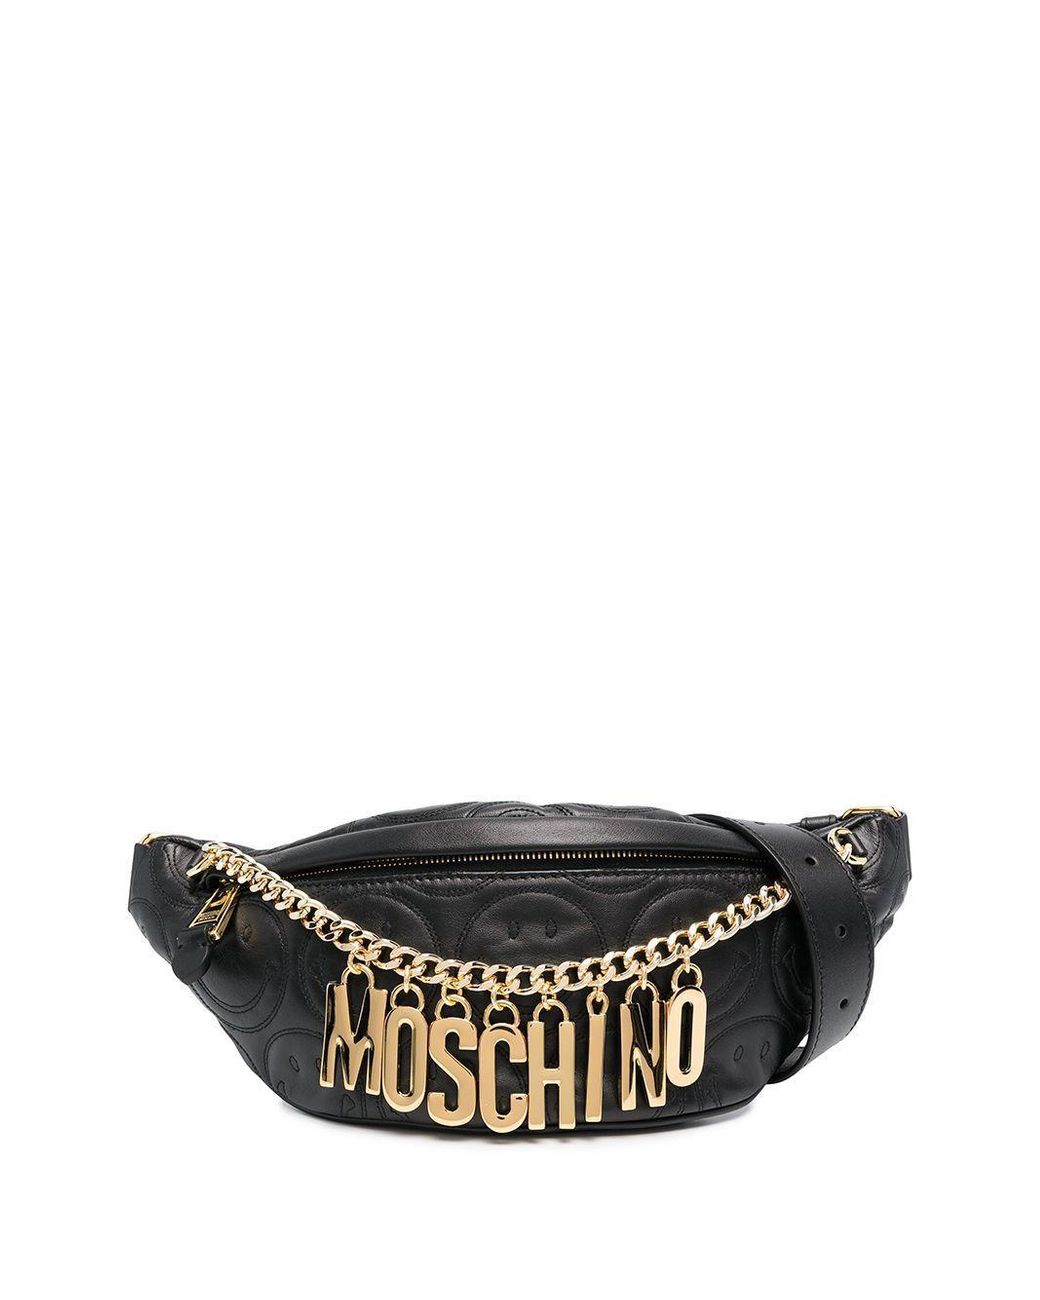 Moschino Leather Smiley Face Logo Belt Bag in Black | Lyst